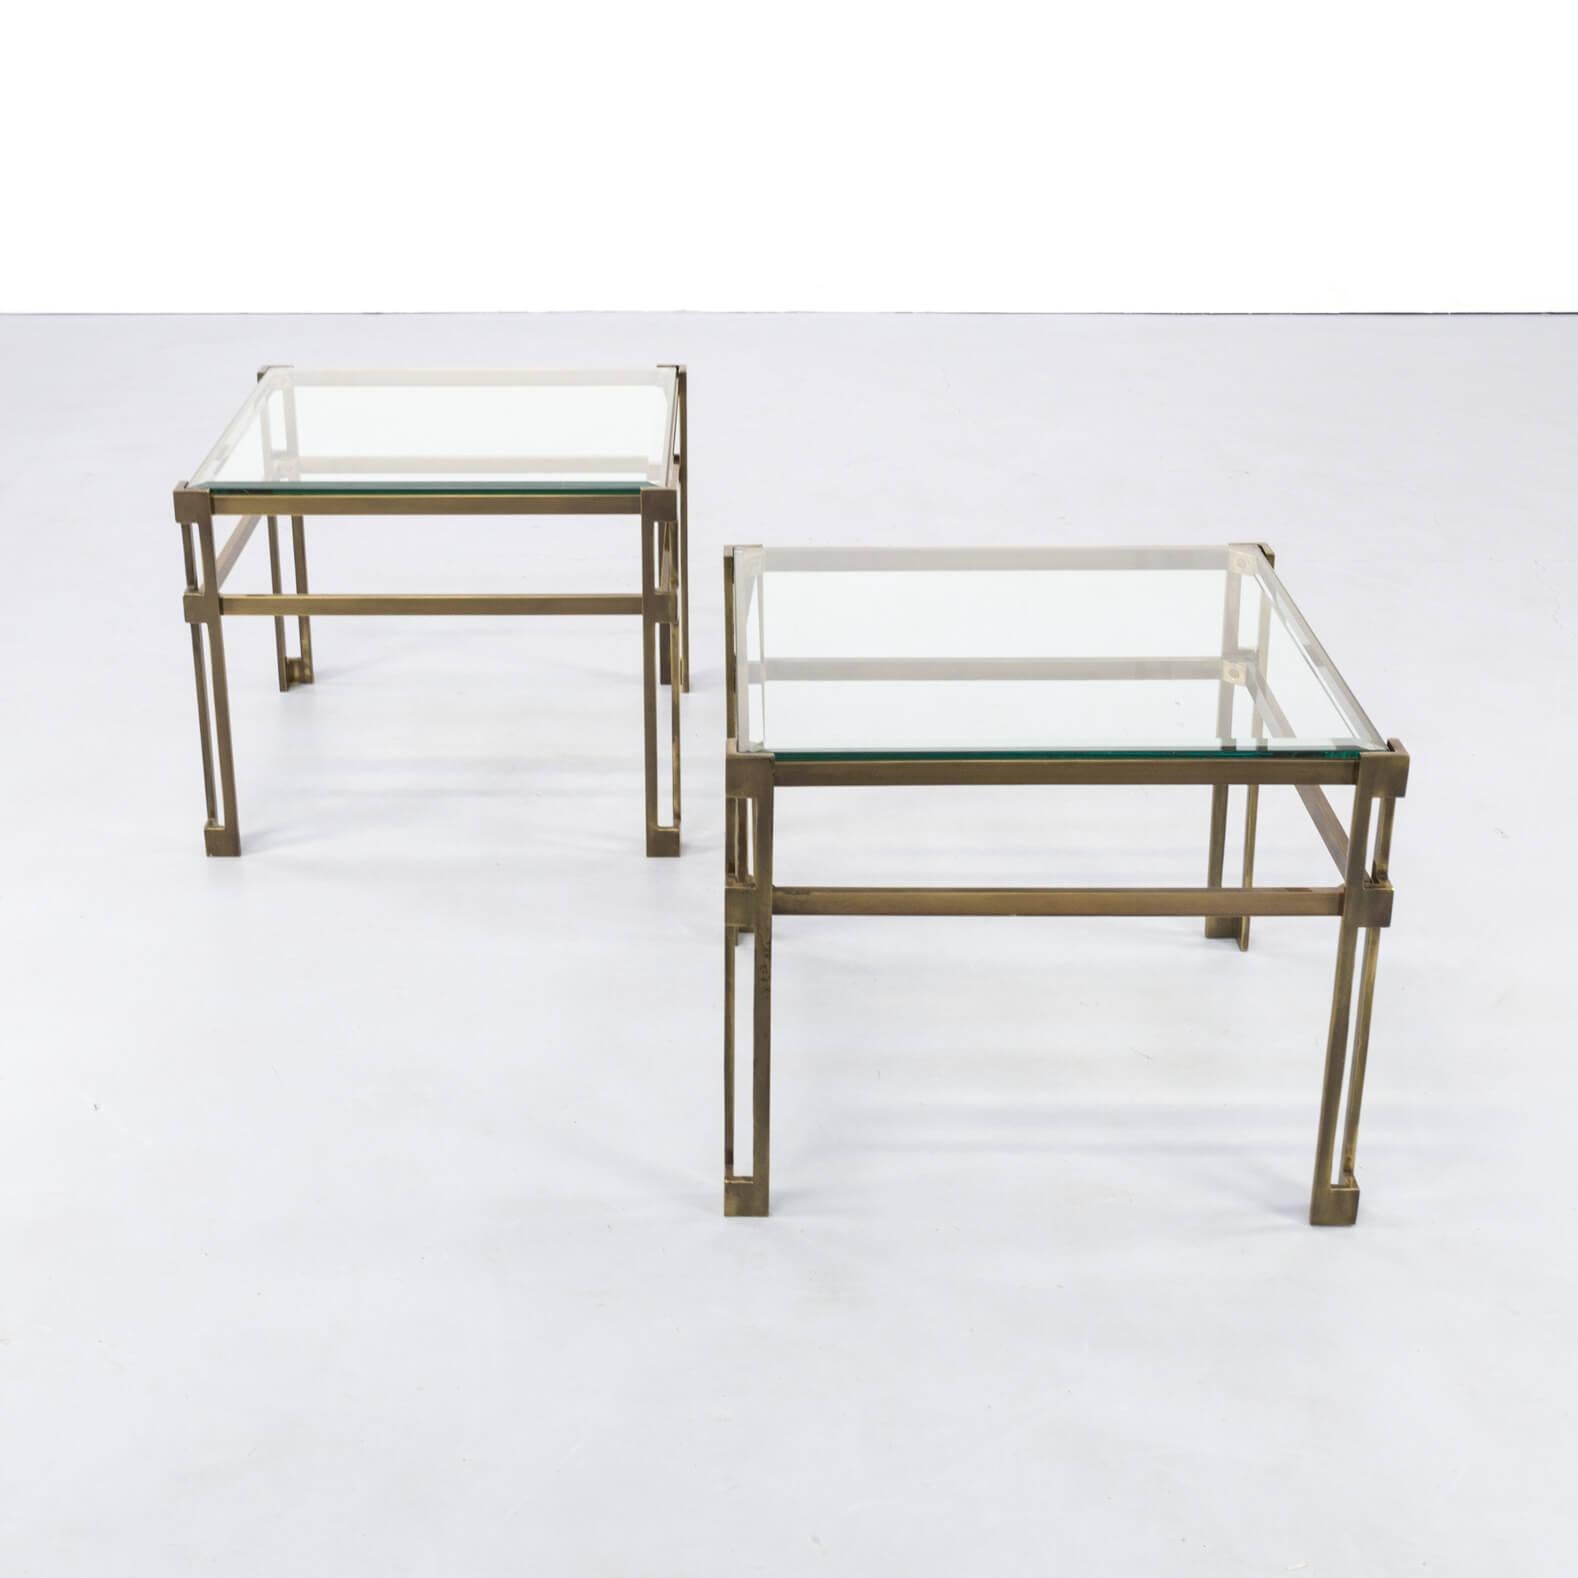 1970s Hollywood Regency style side table for Maison Jansen set of 2. Stylish pair of Regency brass and glass side tables. Brass frame with glass surfaces. Good condition consistent with age and use.